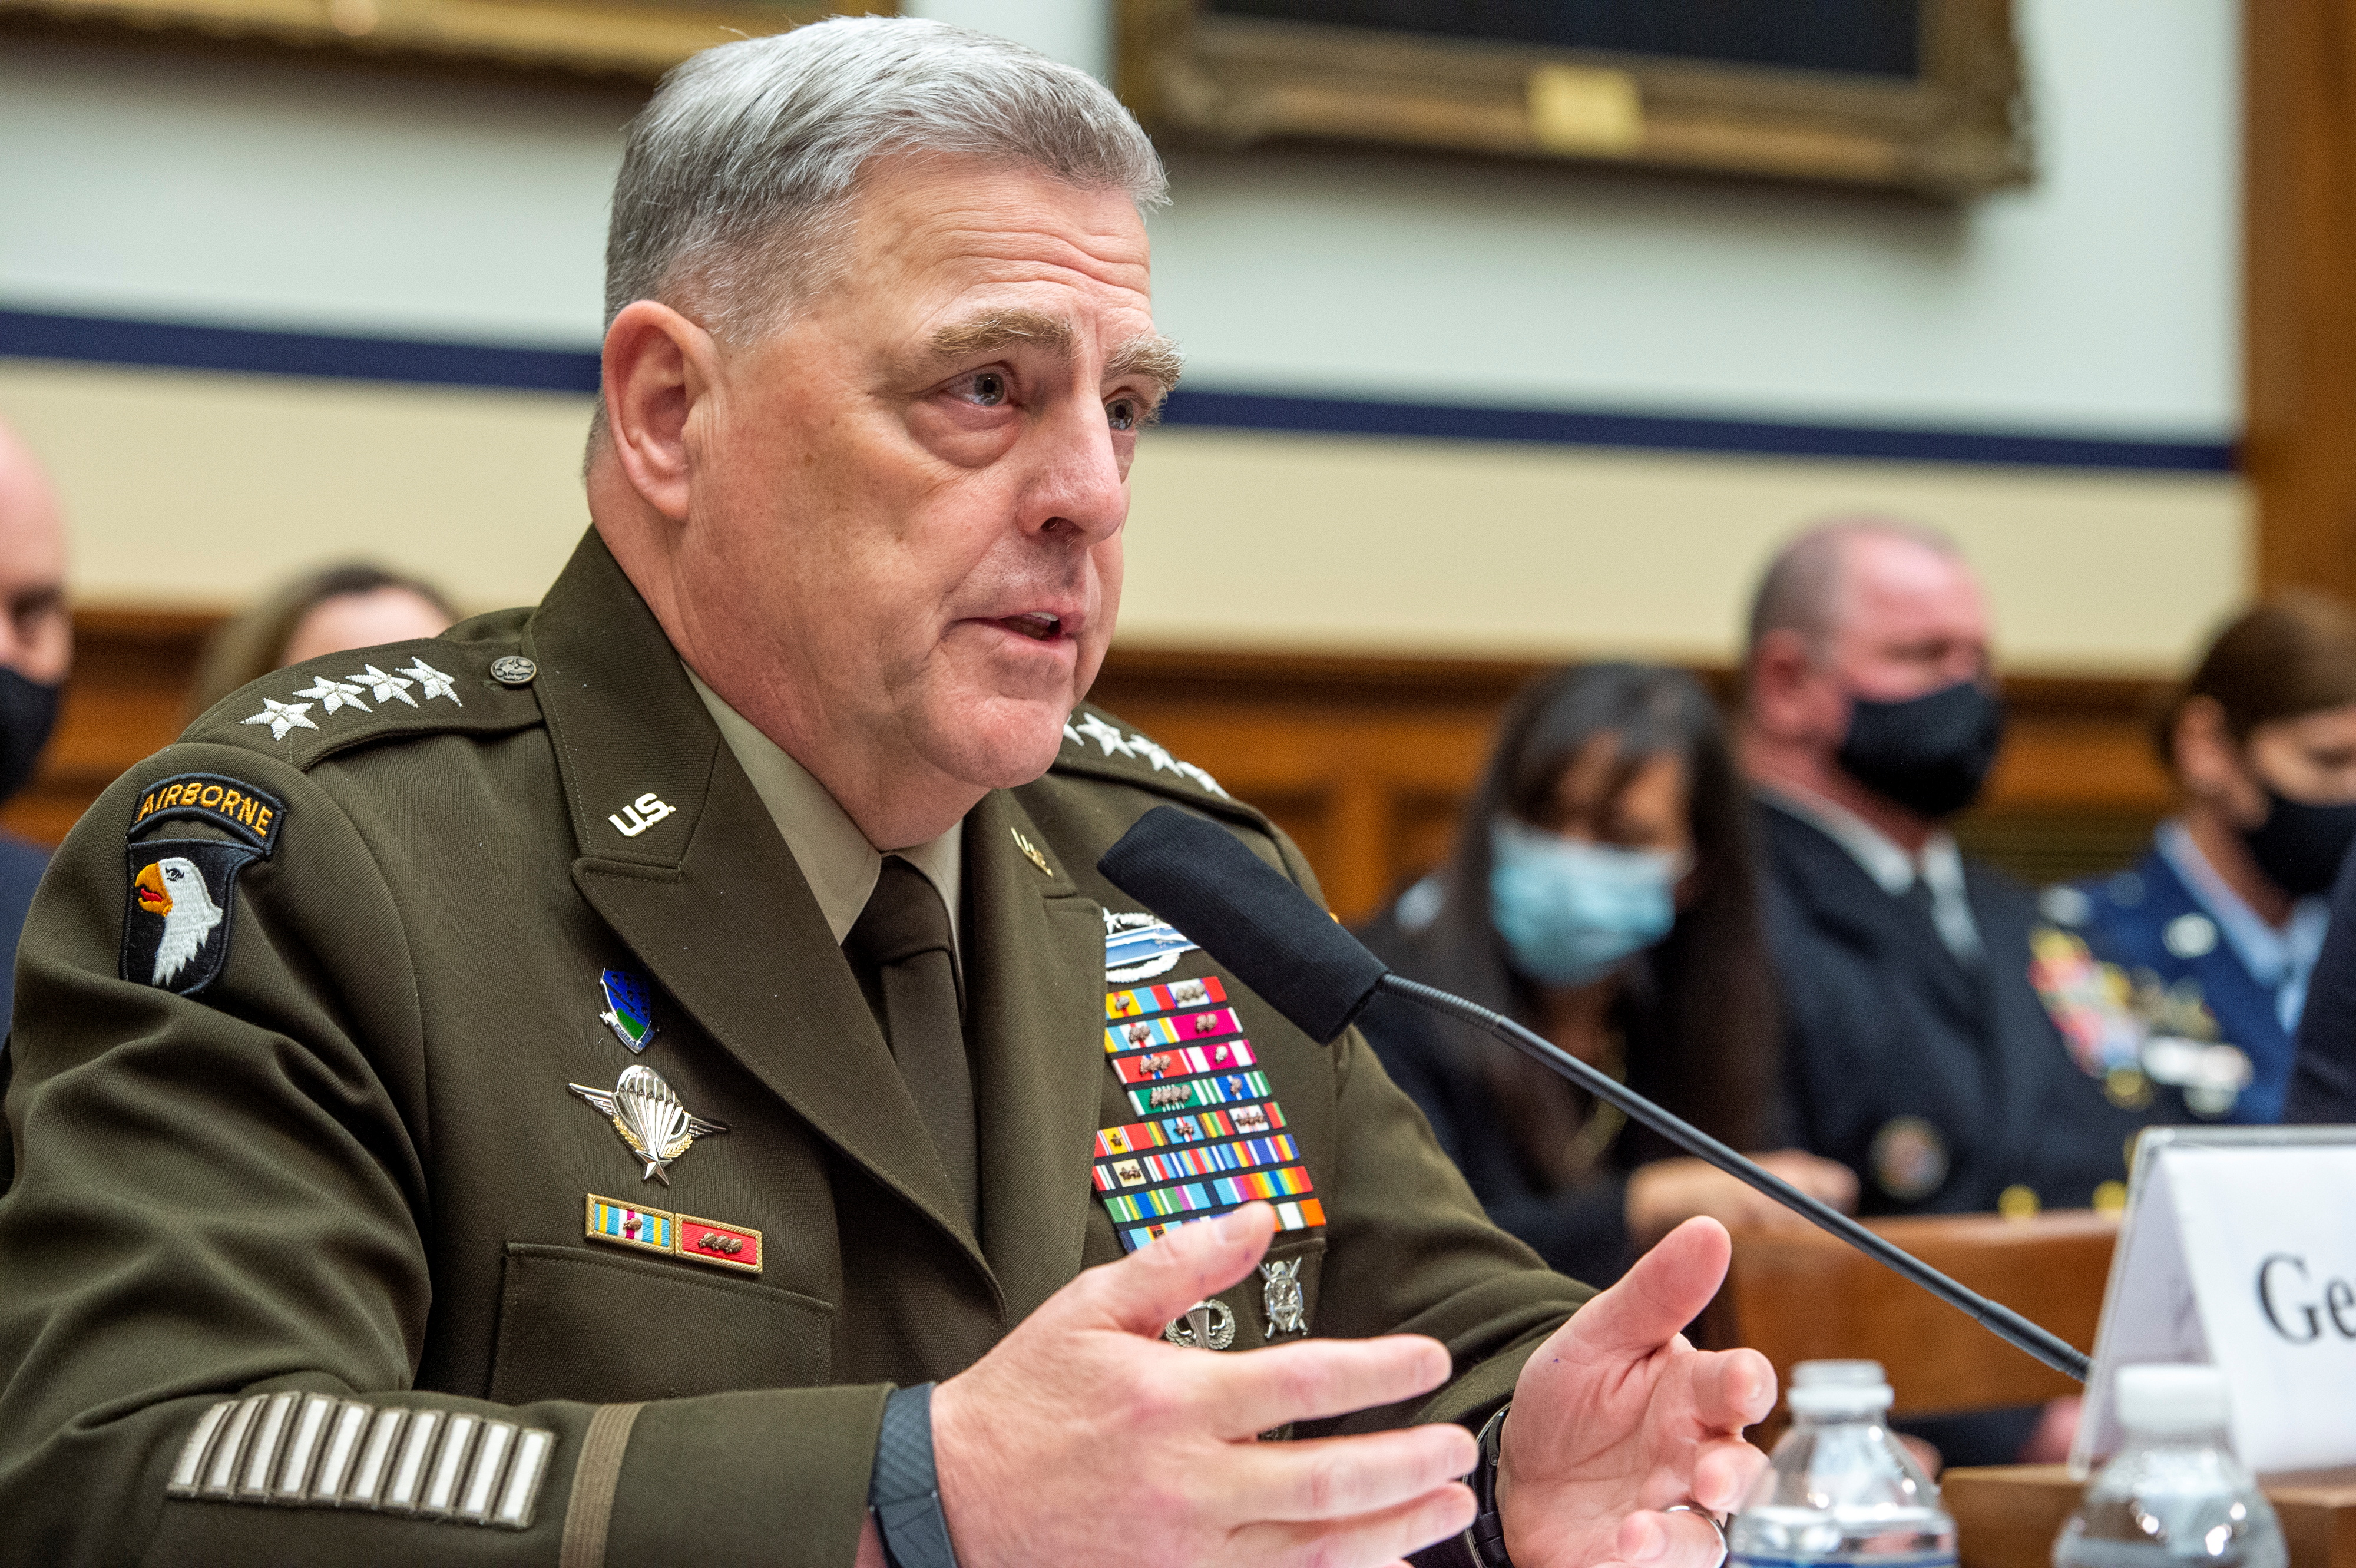 Chairman of the Joint Chiefs of Staff, U.S. Army General Mark A. Milley, responds to questions during a House Armed Services Committee hearing on 